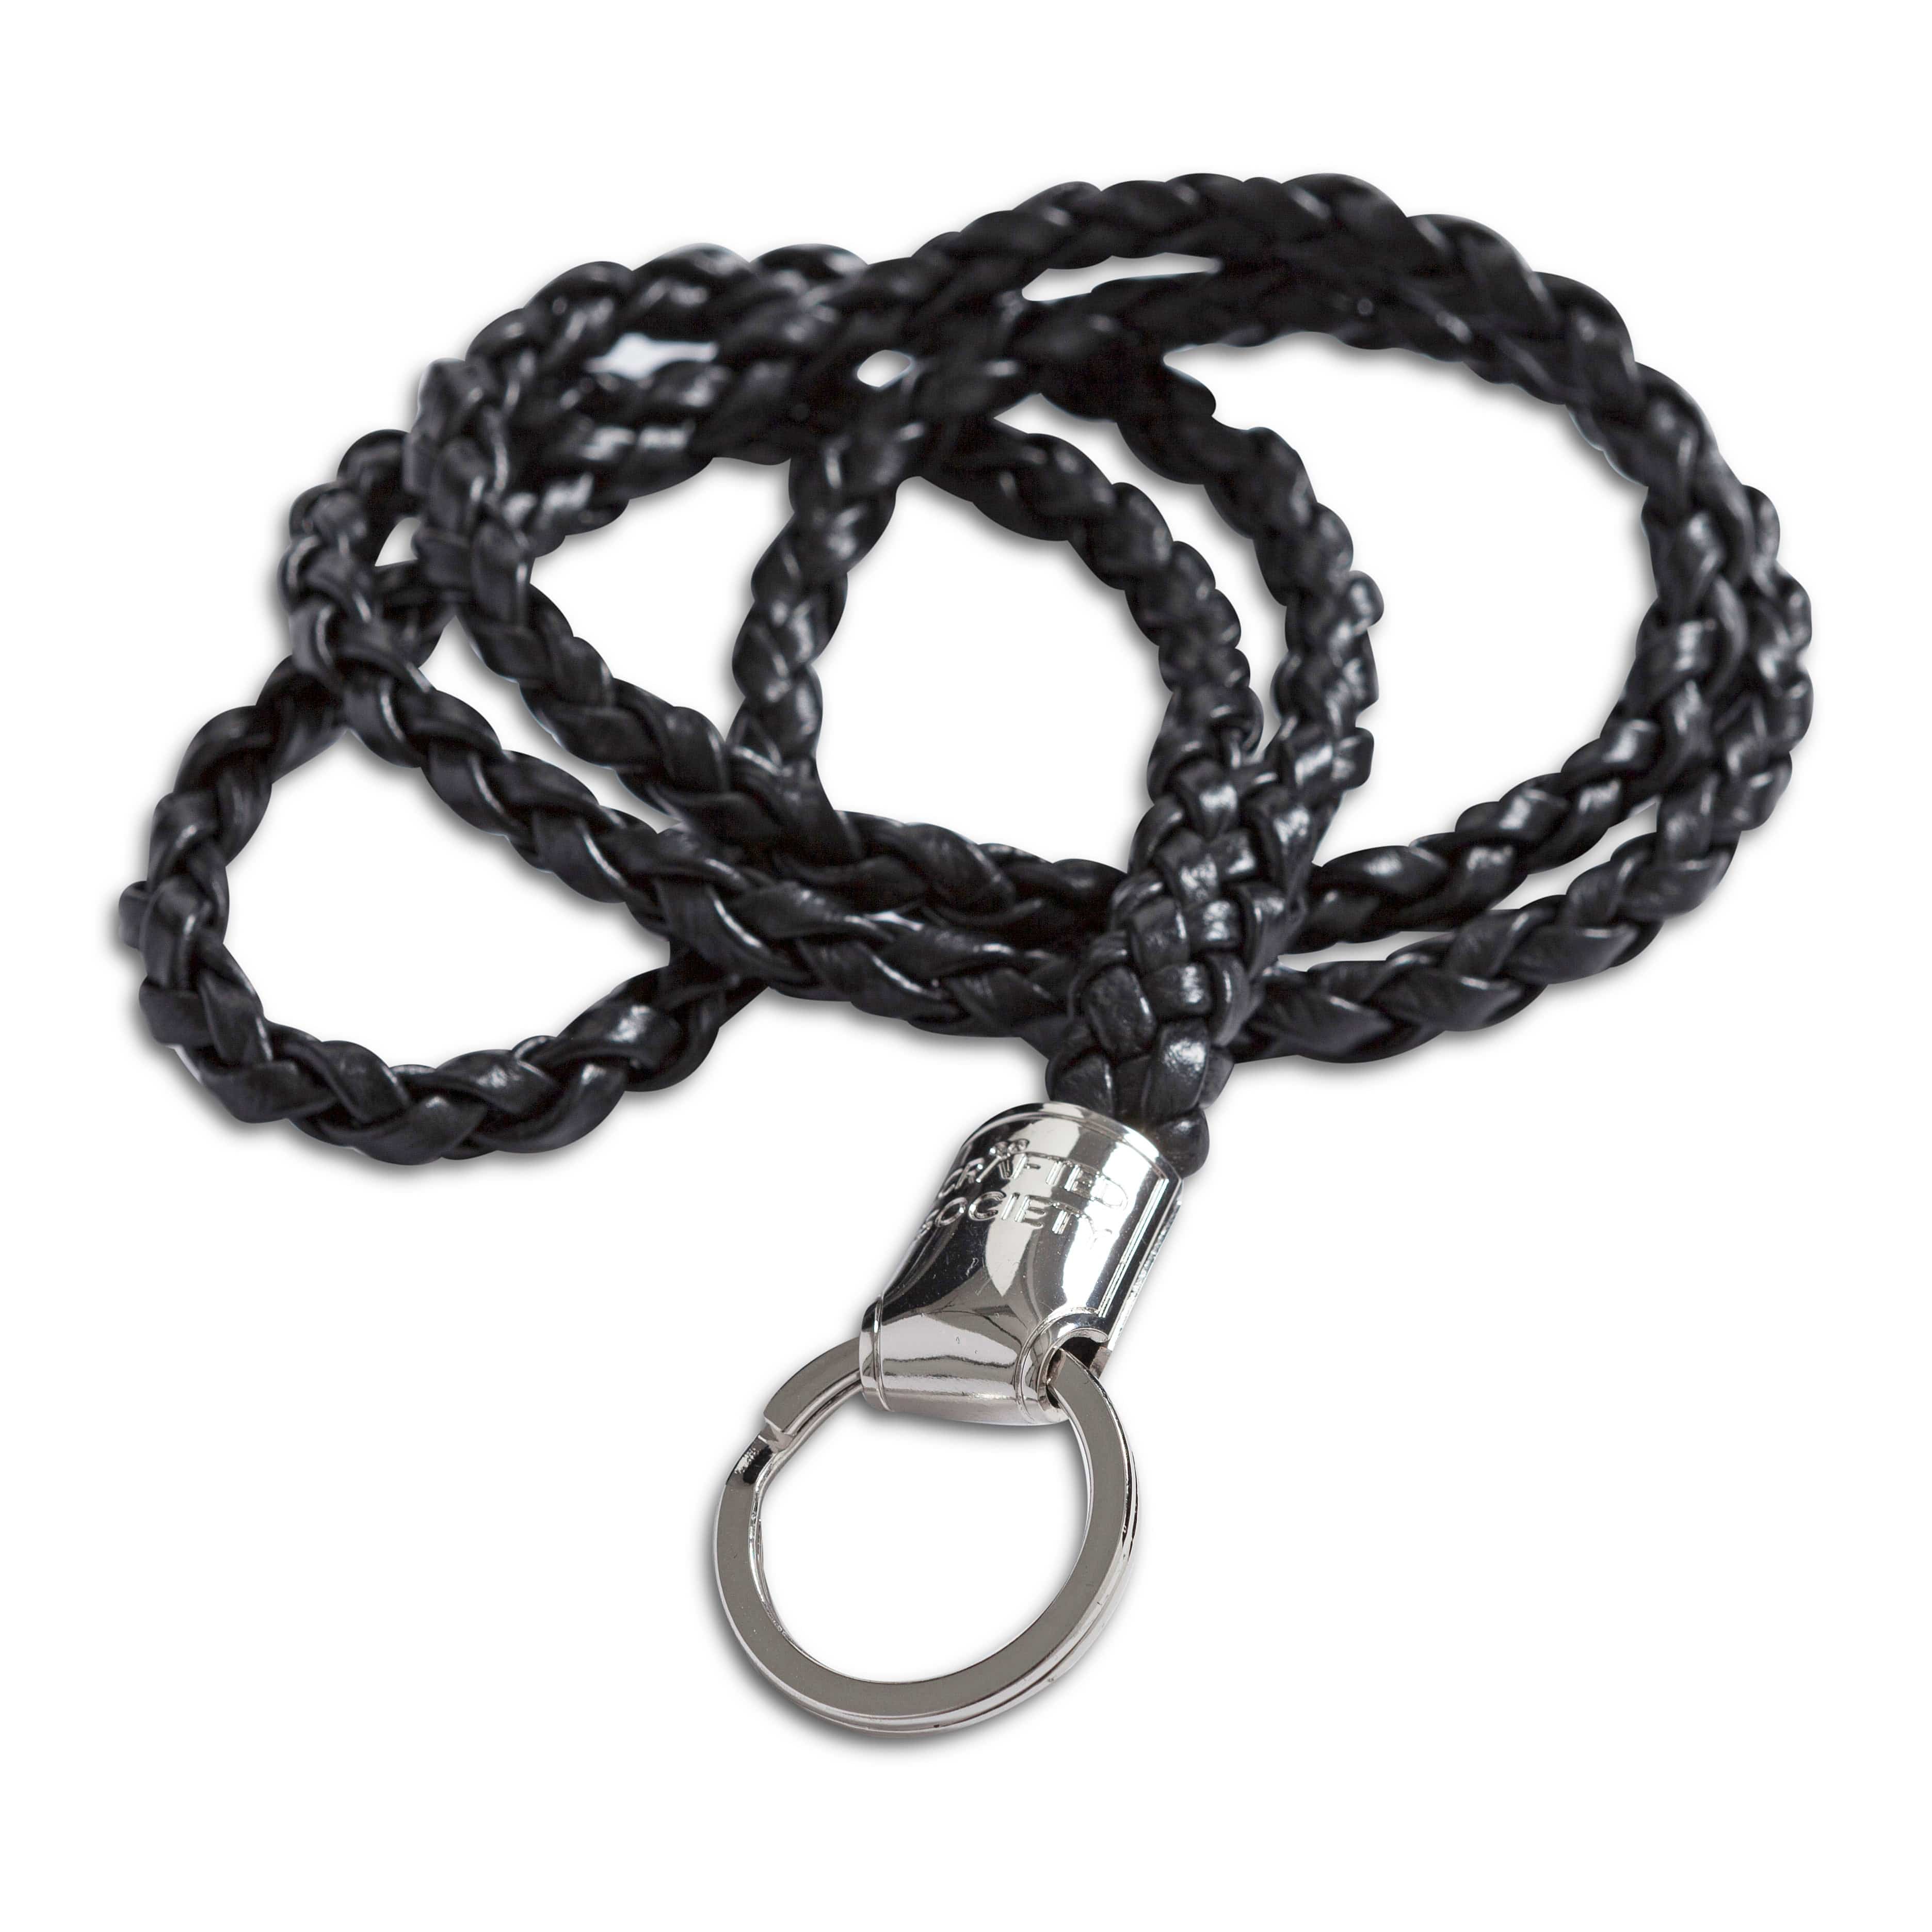 Mauro Lanyard - Black Saffiano Leather - Handcrafted in Italy